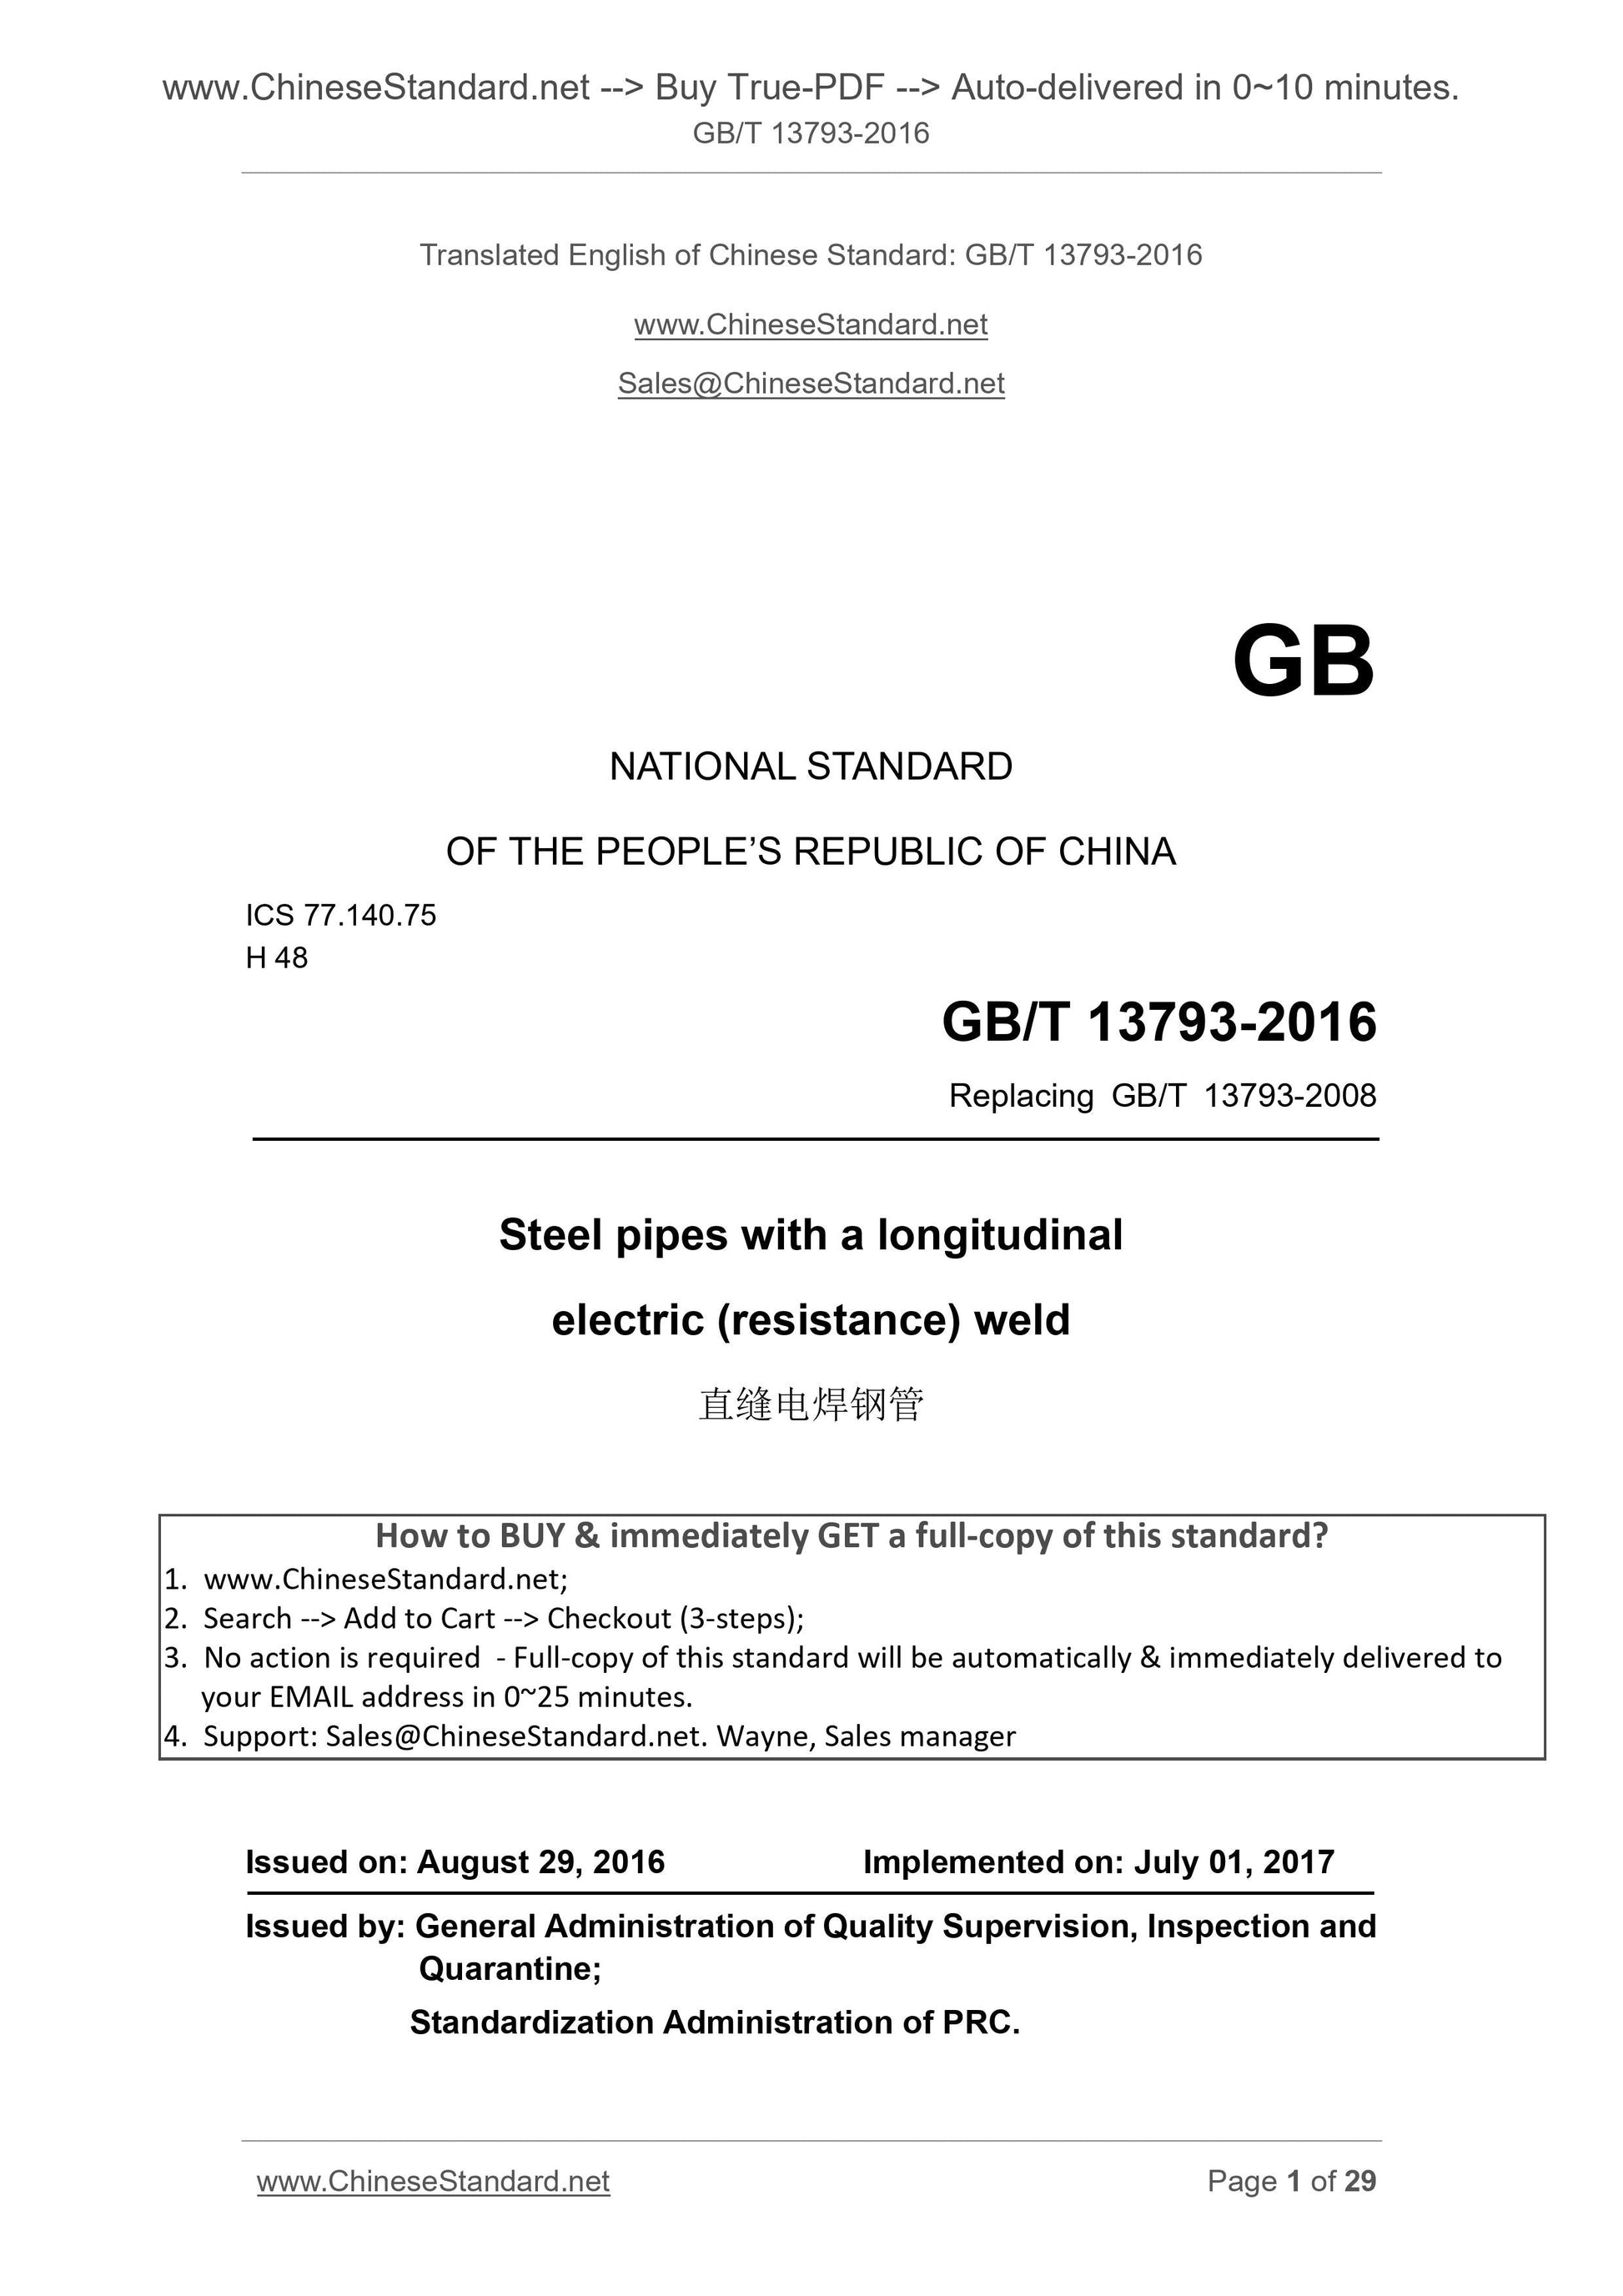 GB/T 13793-2016 Page 1